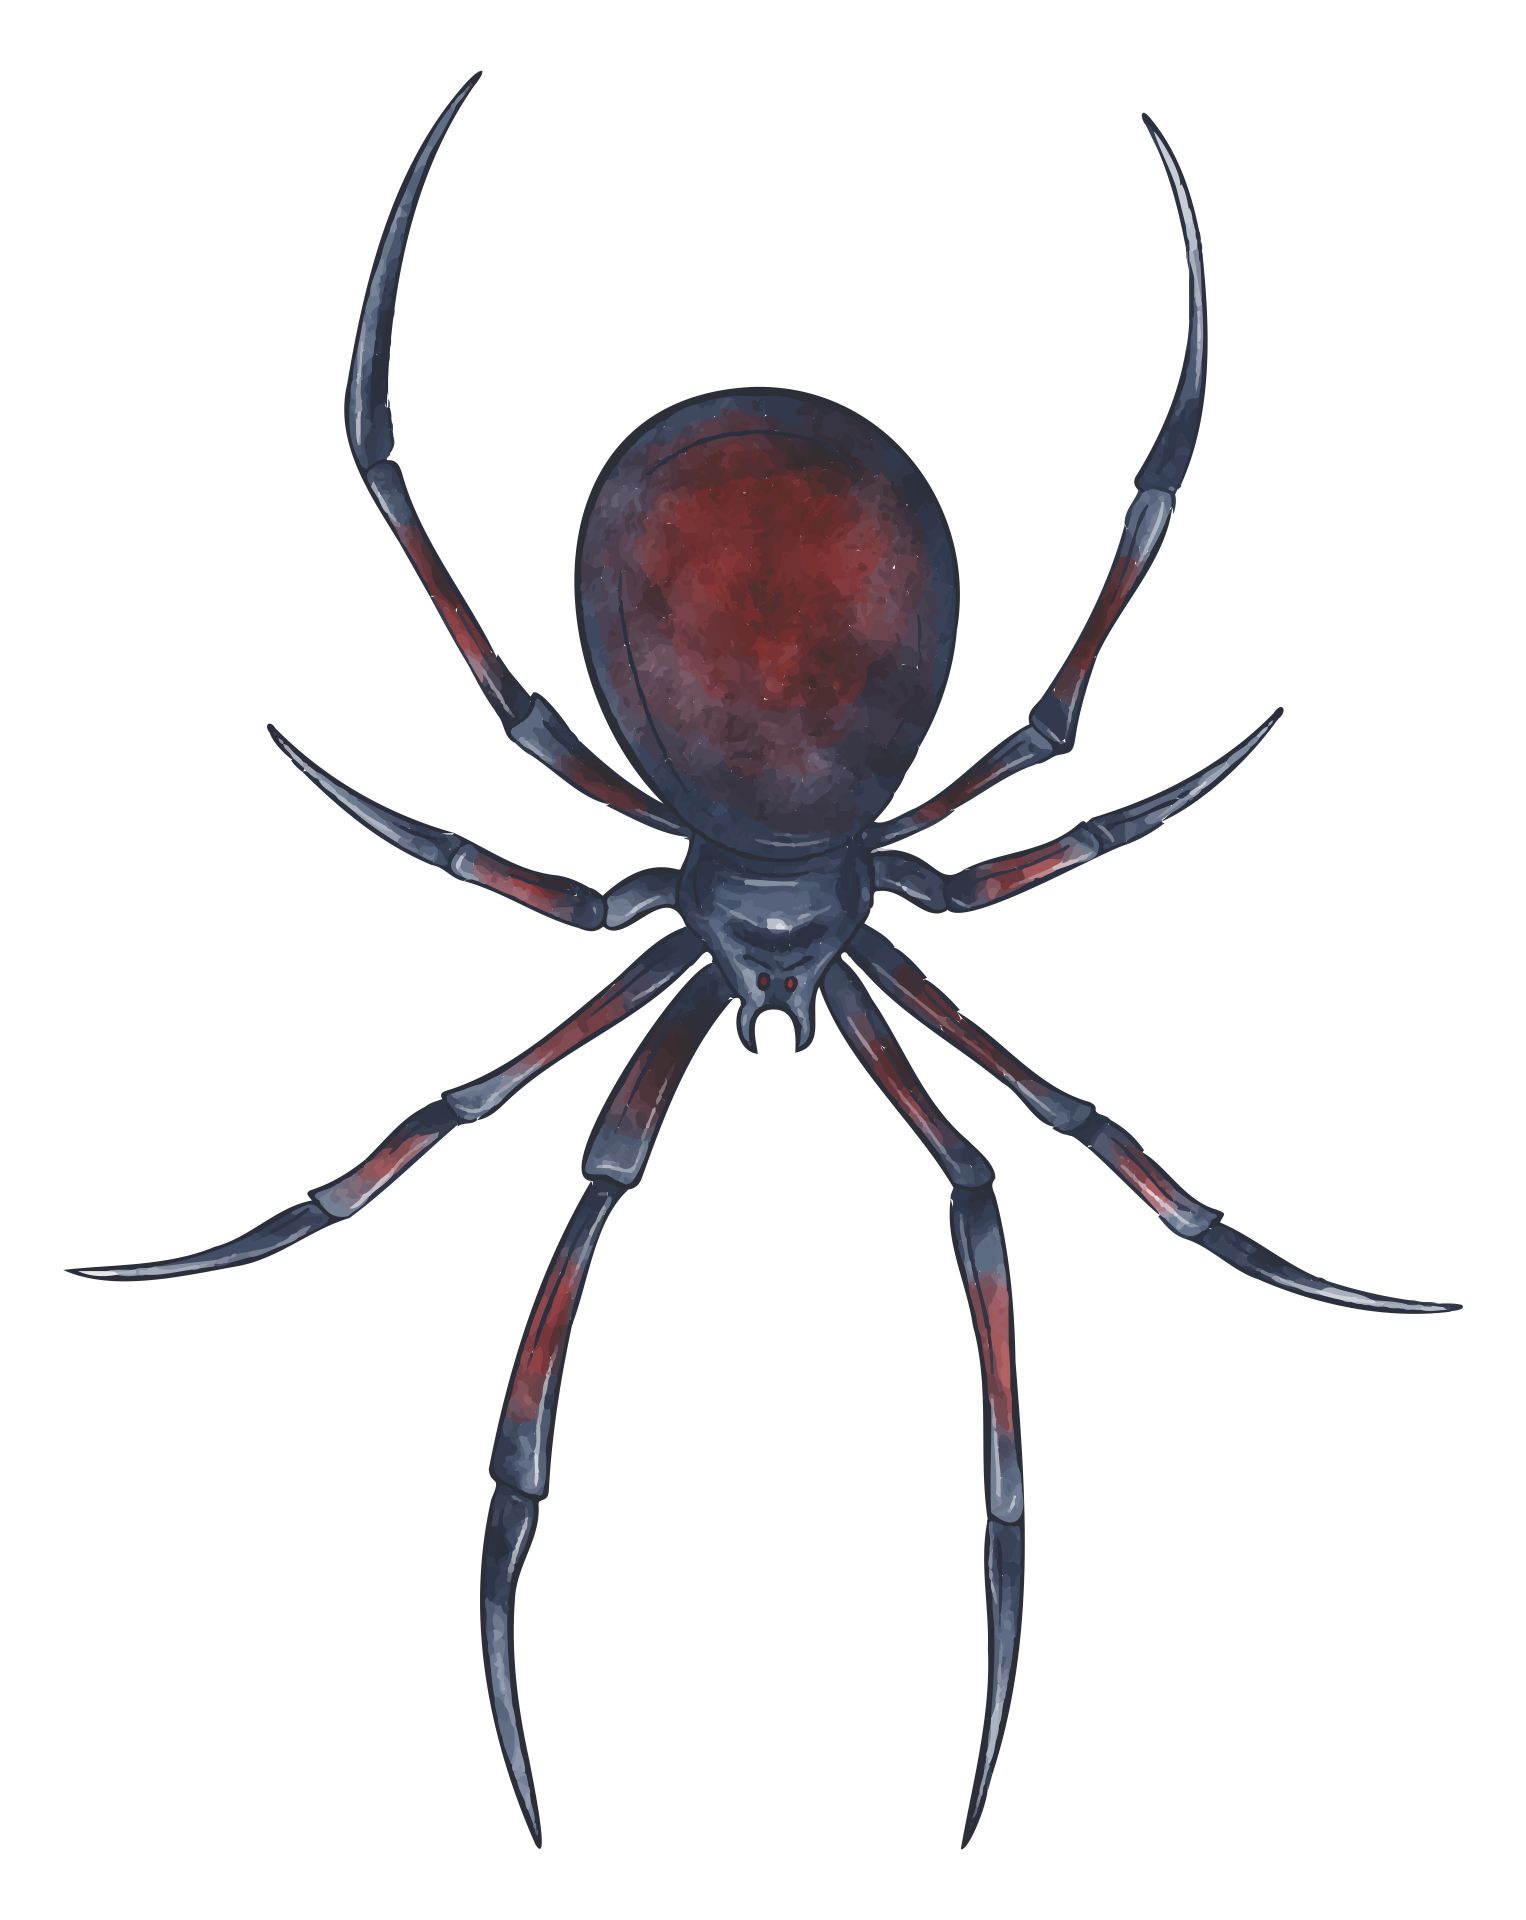 Giant Spiders For Halloween Decorations